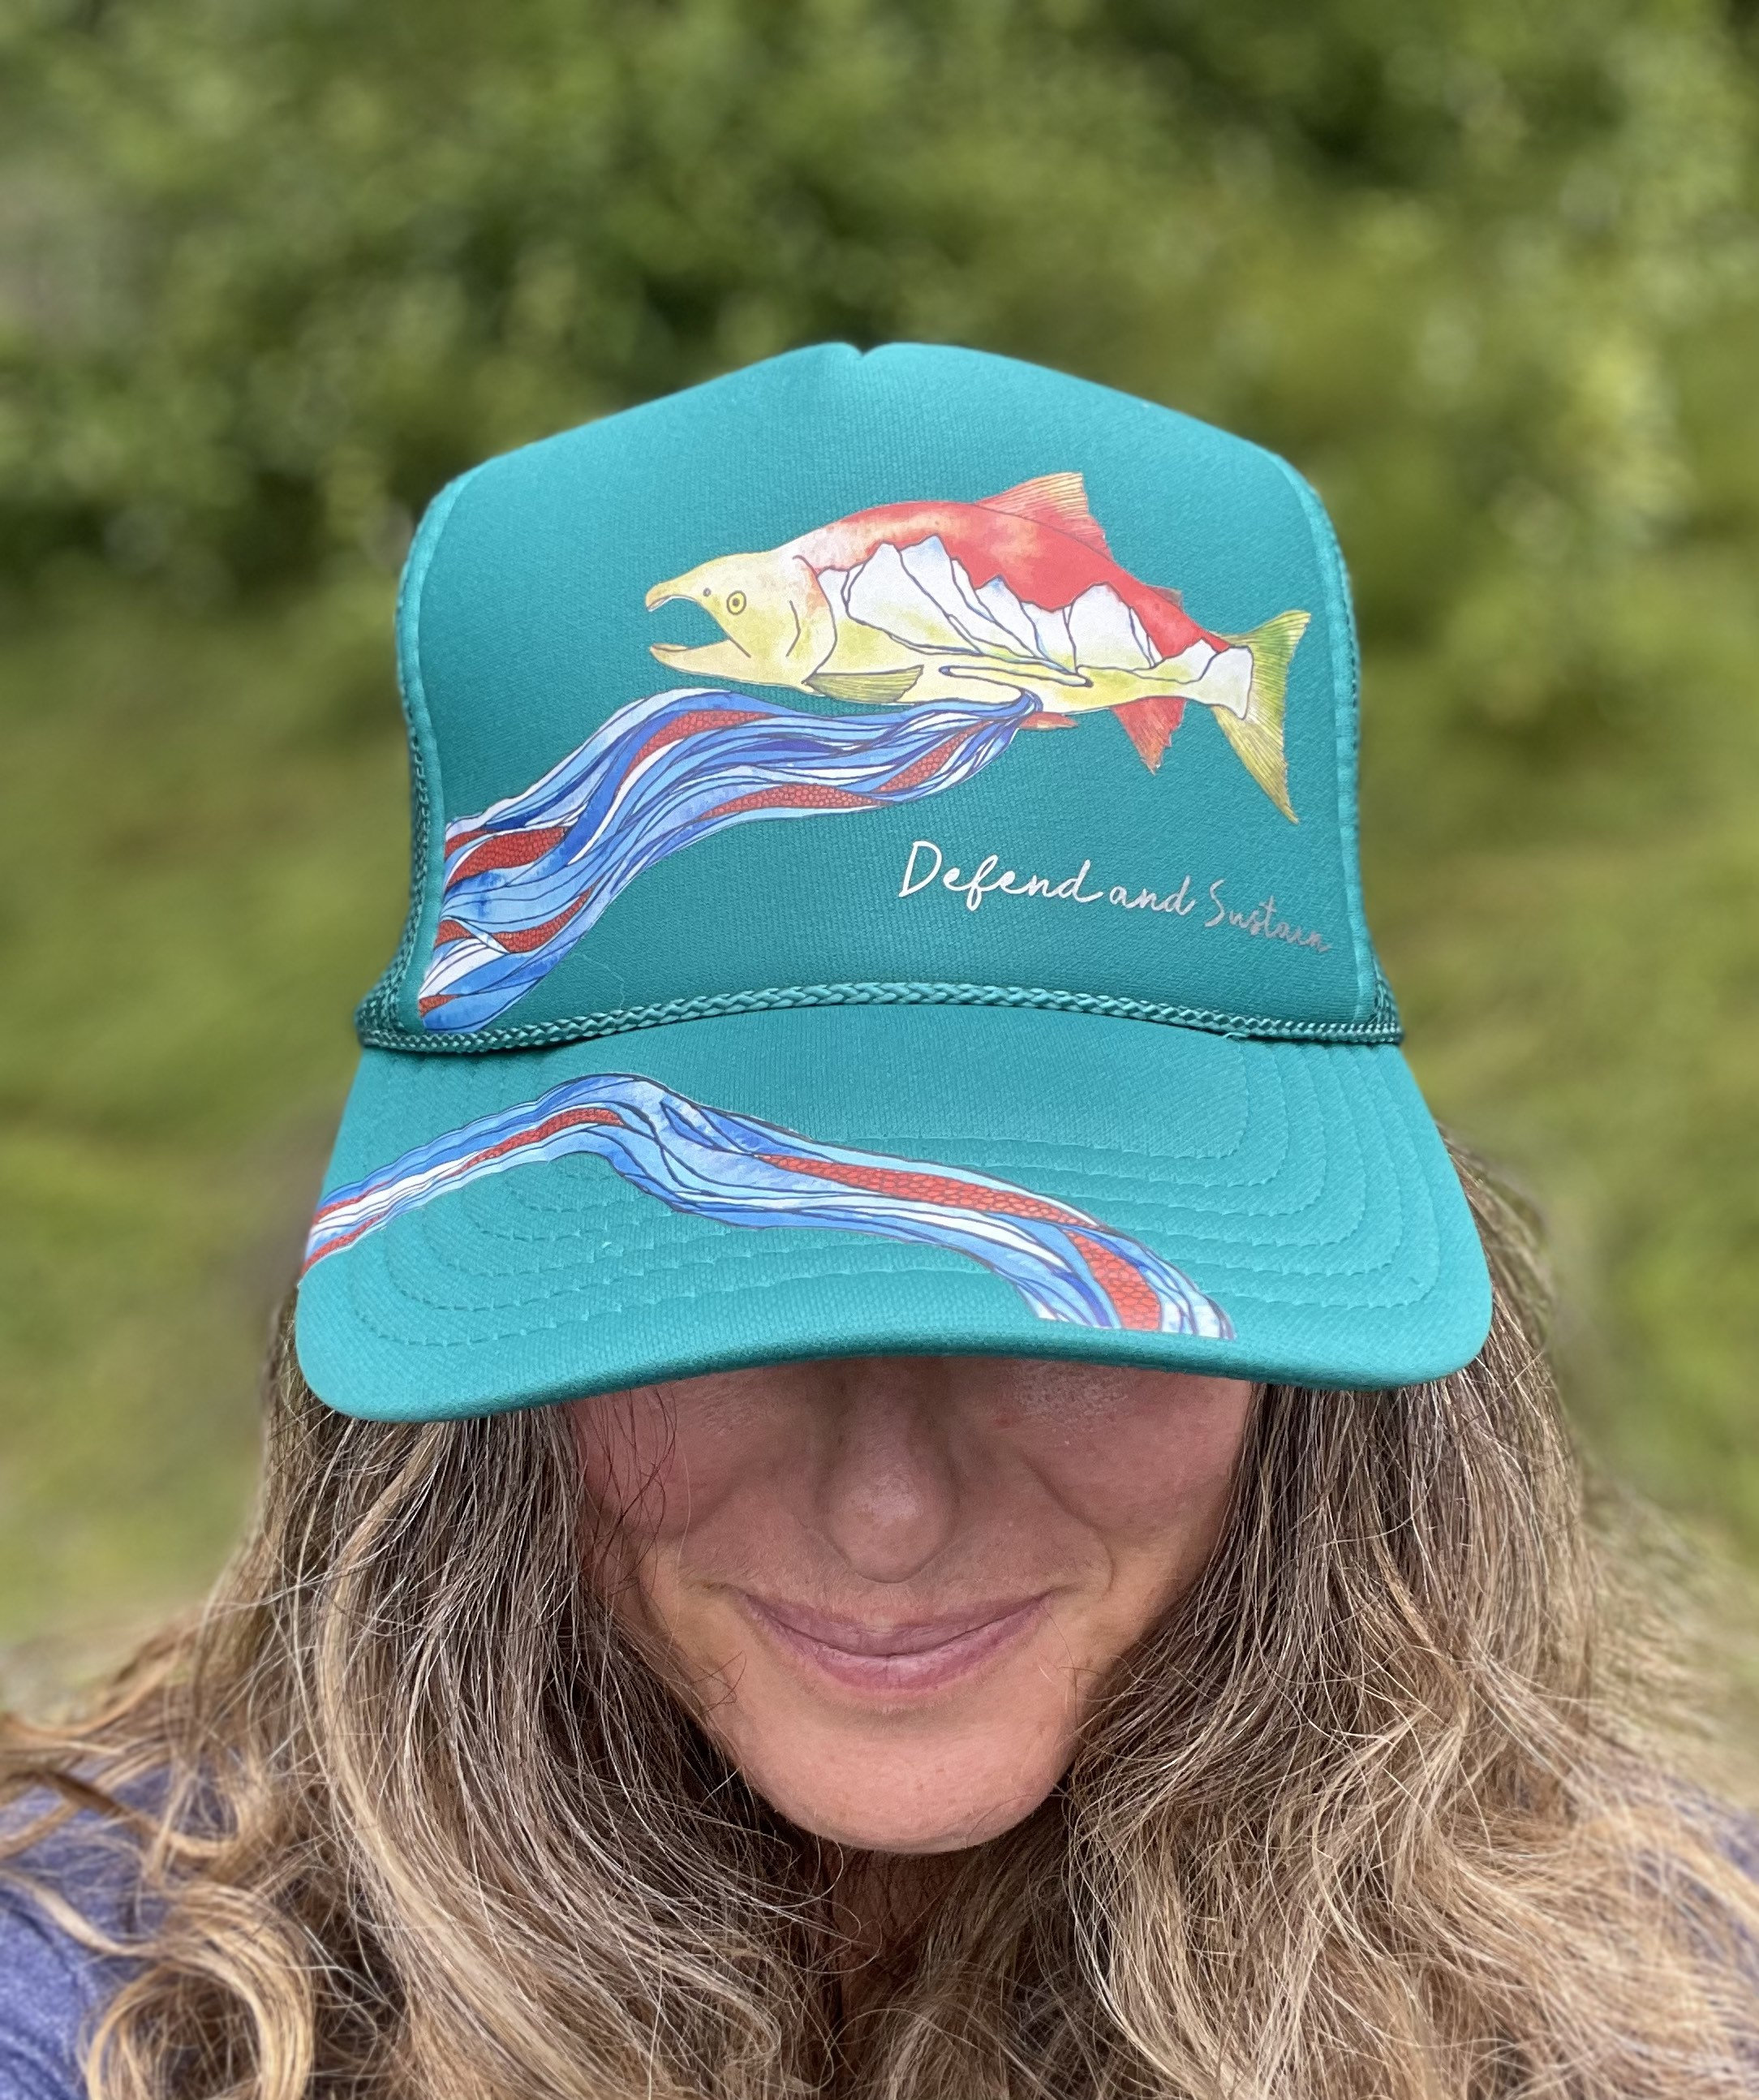 Defend and Sustain Artful Trucker Hat : Teal